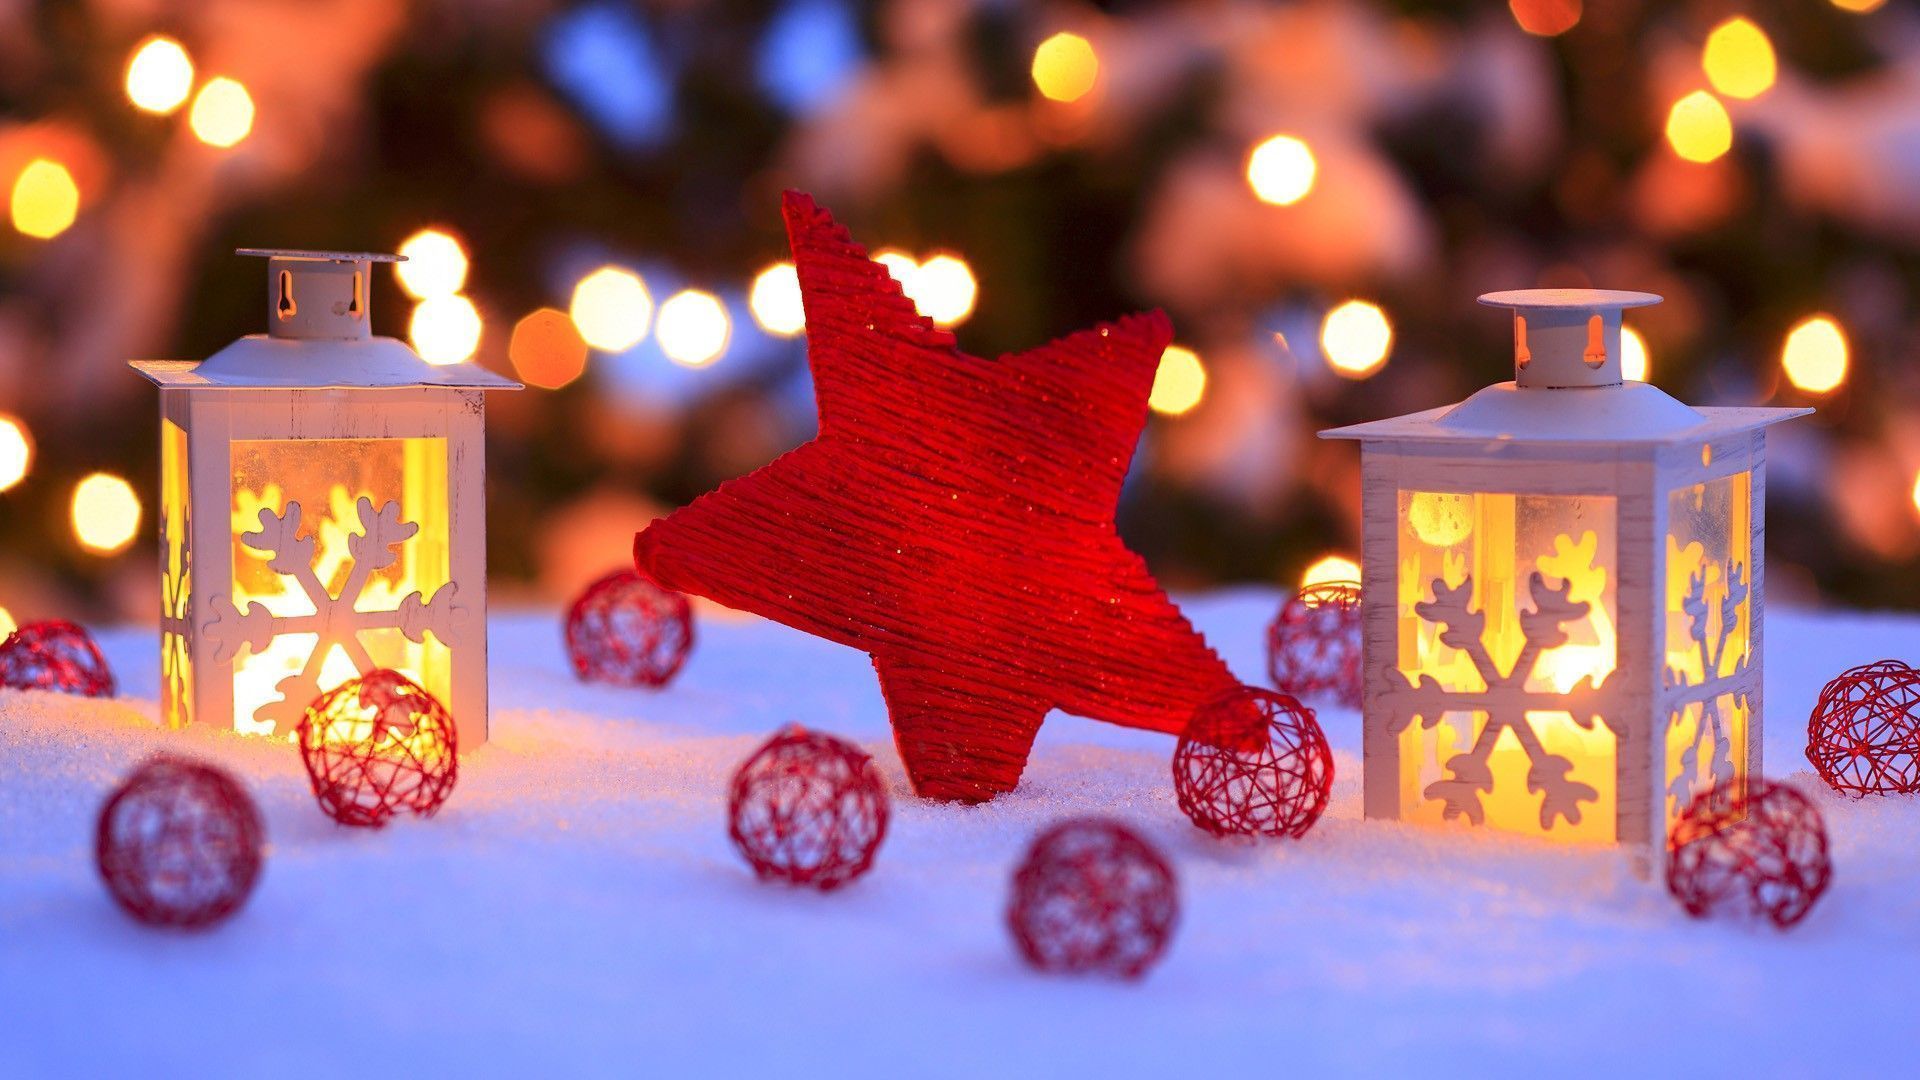 Christmas Desktop Backgrounds - Wallpapers, Pics, Pictures, Images